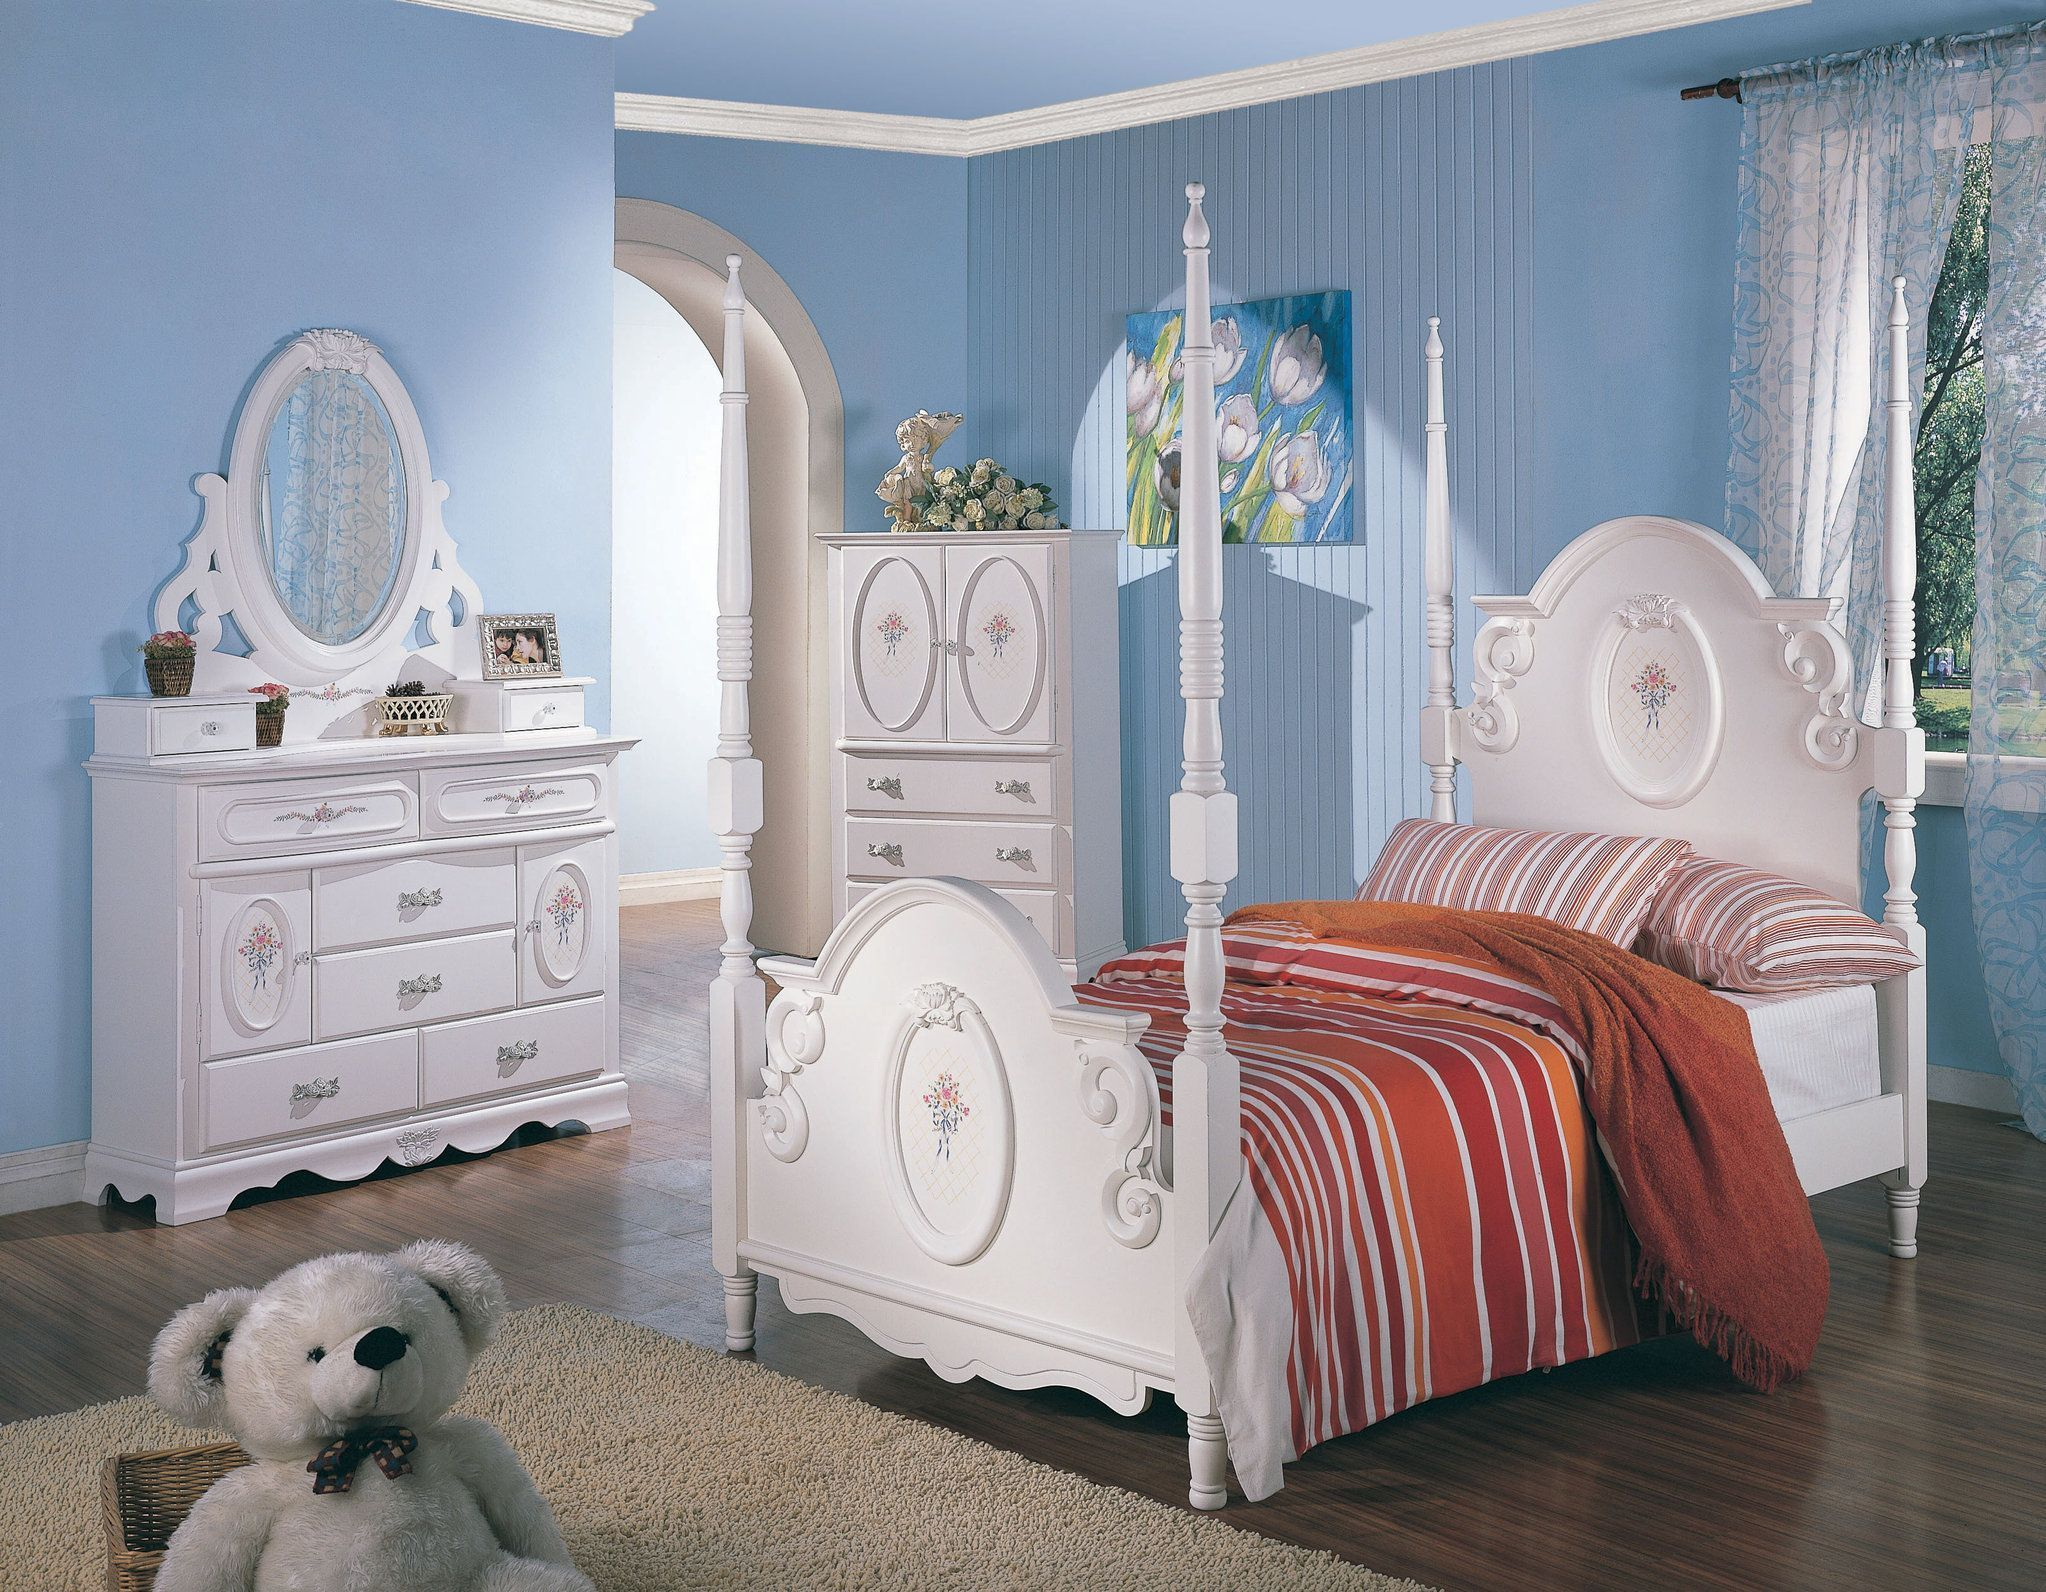 30 Inspired Picture Of Girls Bedroom Furniture Girls Bedroom within measurements 2046 X 1592